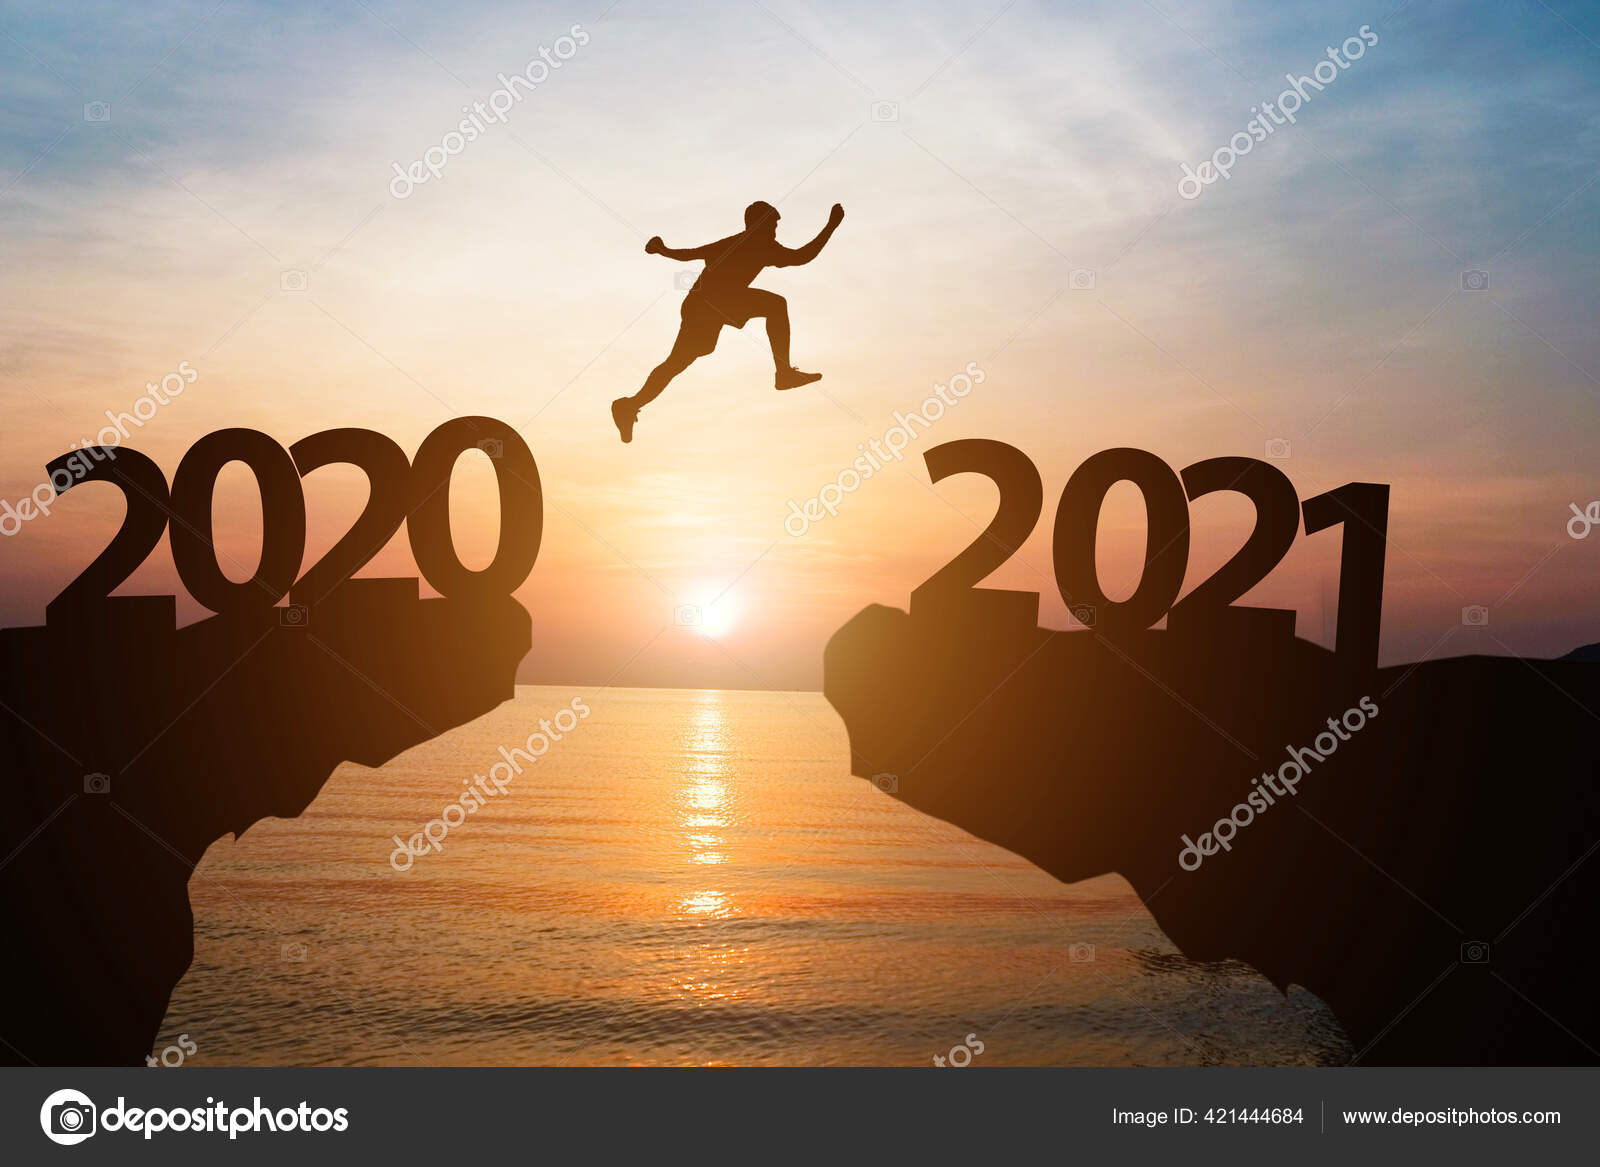 Happy New Year 2021 Silhouette Concept Man Jumping 2020 2021 Stock ...